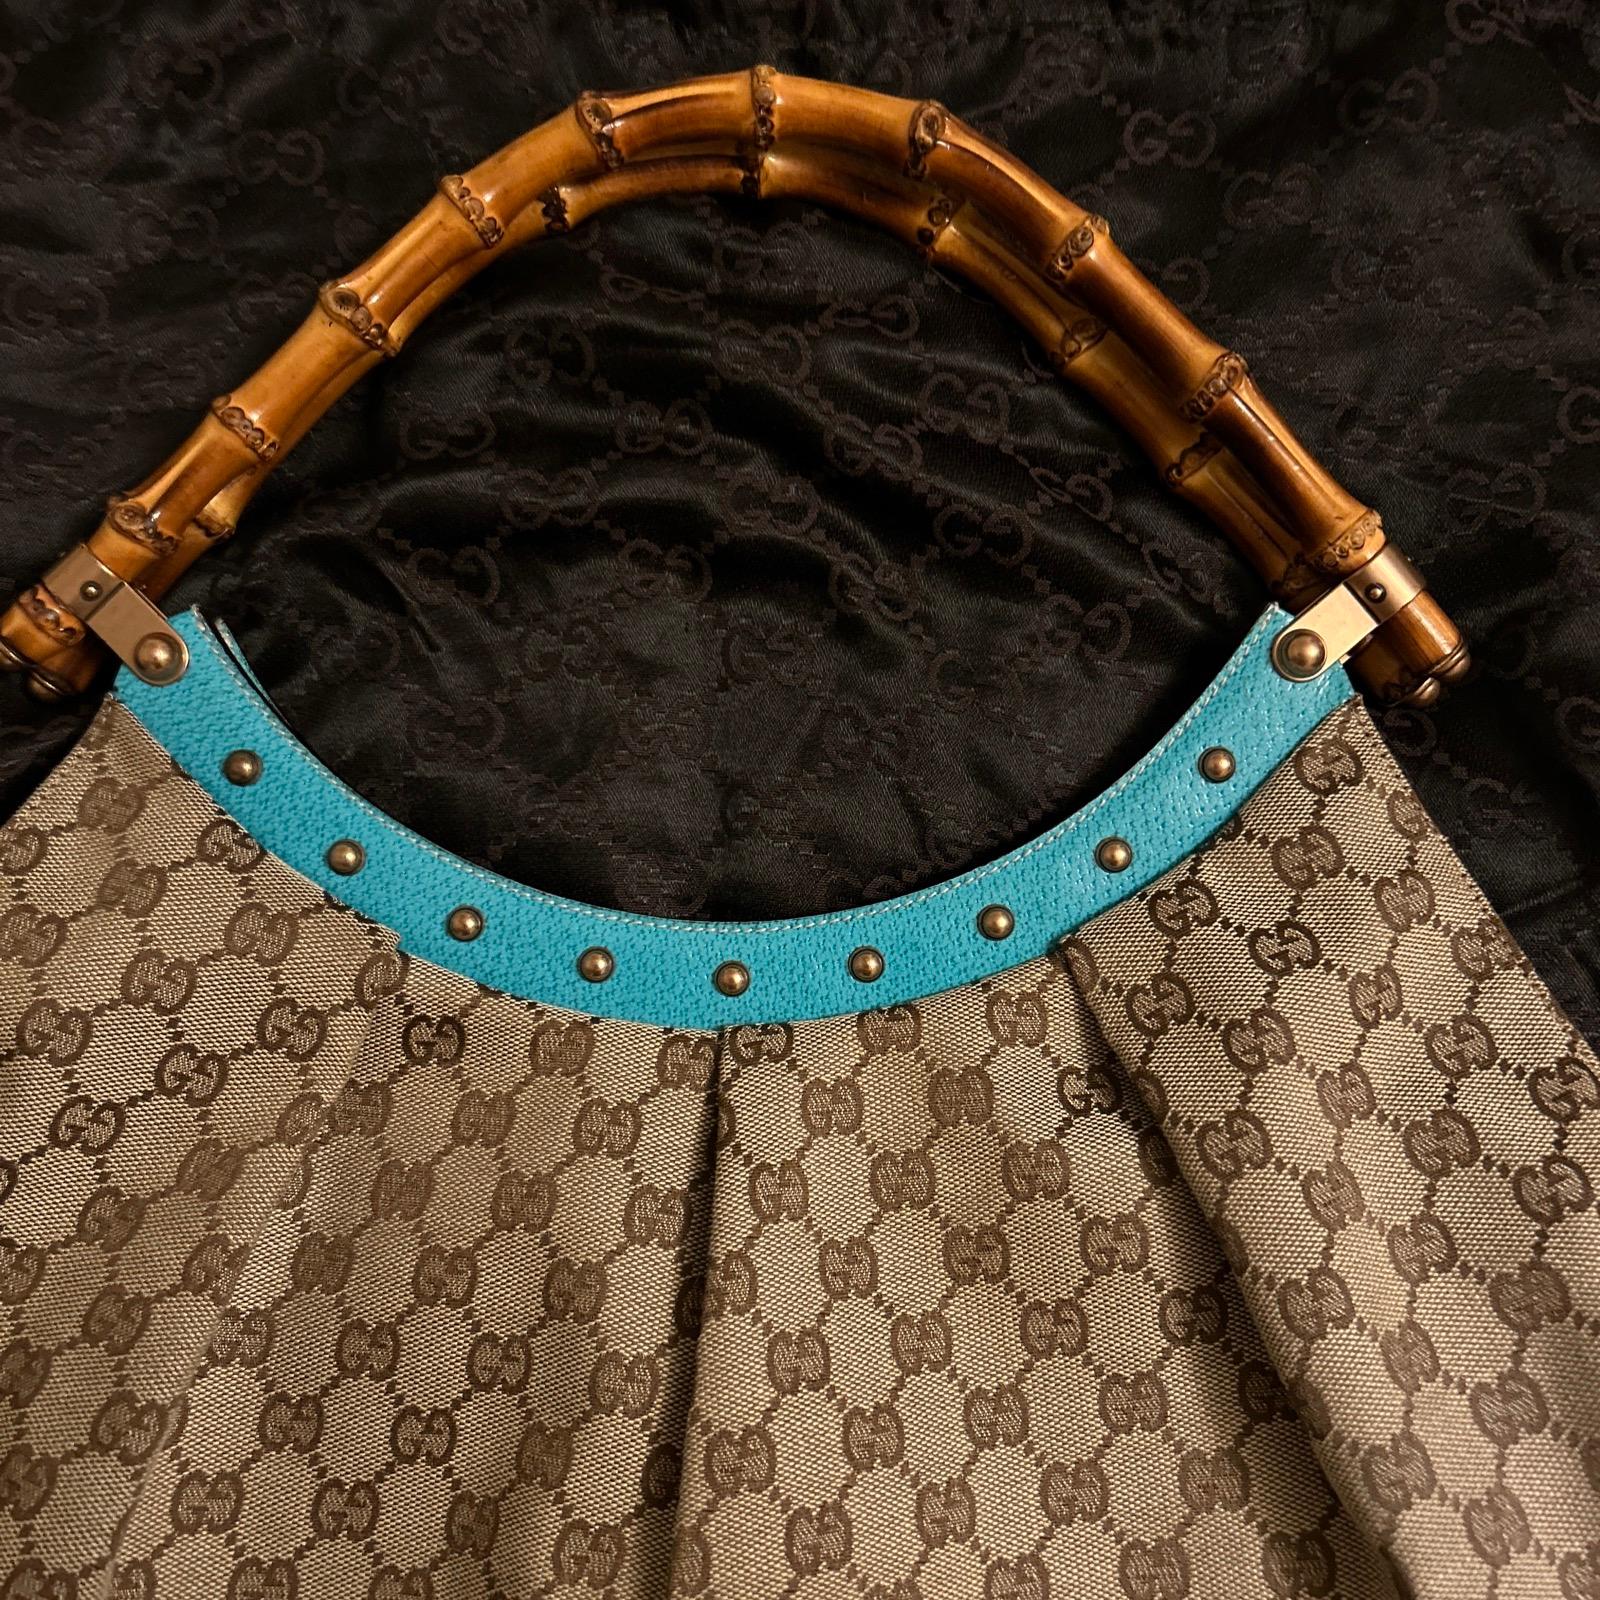 fabulous Gucci monogram bag.

Designed by Tom Ford for Gucci in the 90s.

In superb condition . Outside is very good and inside is beautifully clean. 

This bag has amazing  bamboo top handles with bronze/ gold coloured metal hardware. Fabulous